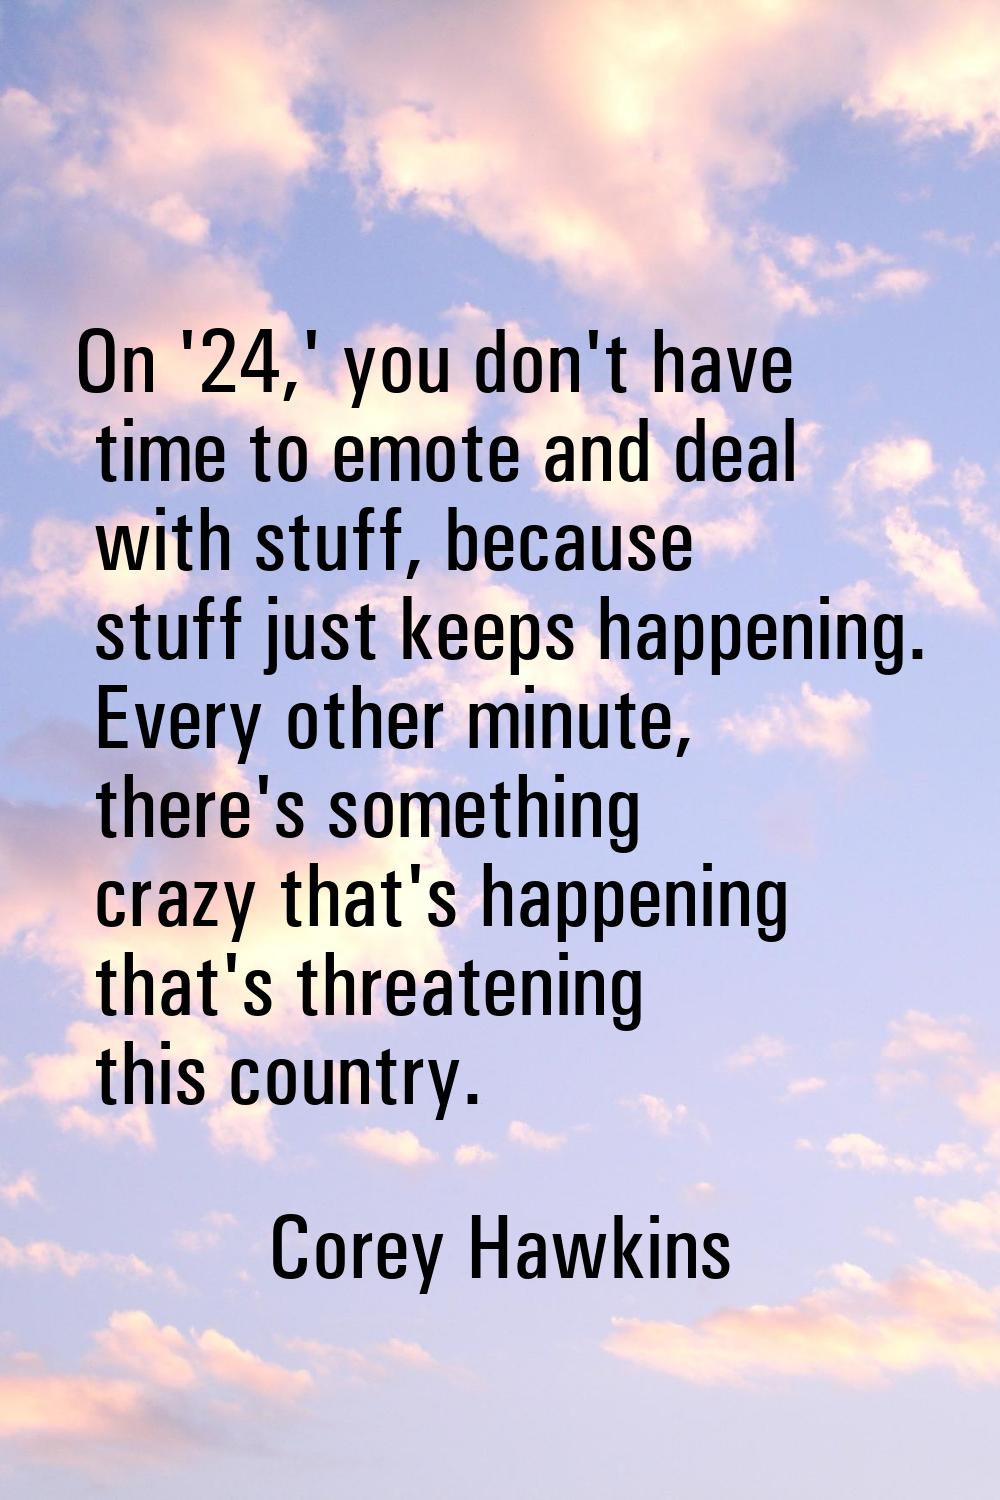 On '24,' you don't have time to emote and deal with stuff, because stuff just keeps happening. Ever